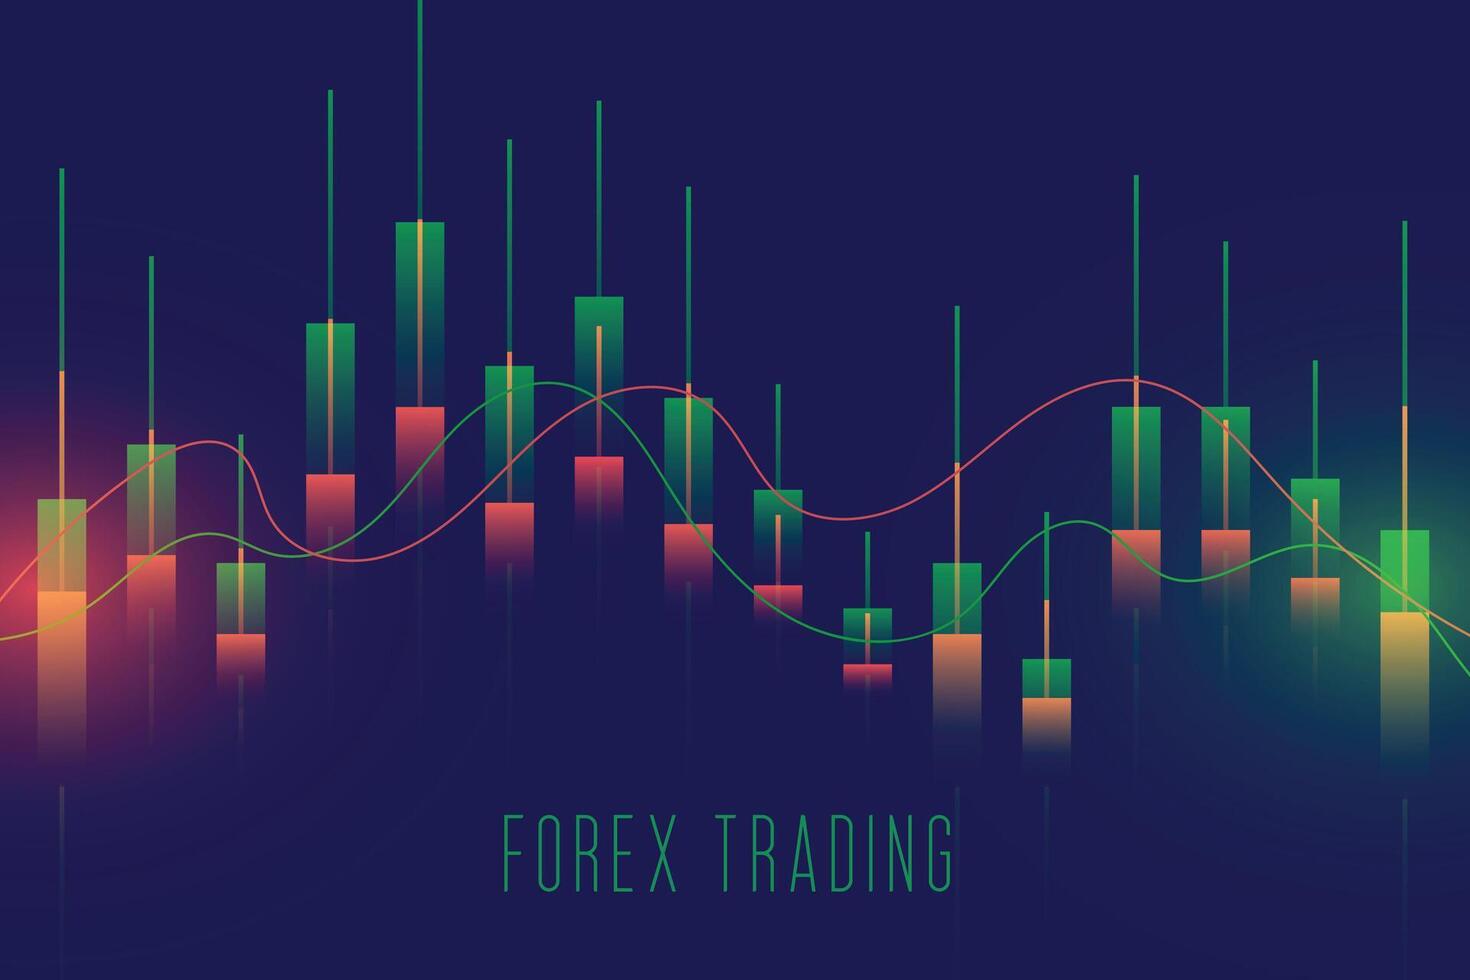 forex trading stock market candle graph background vector